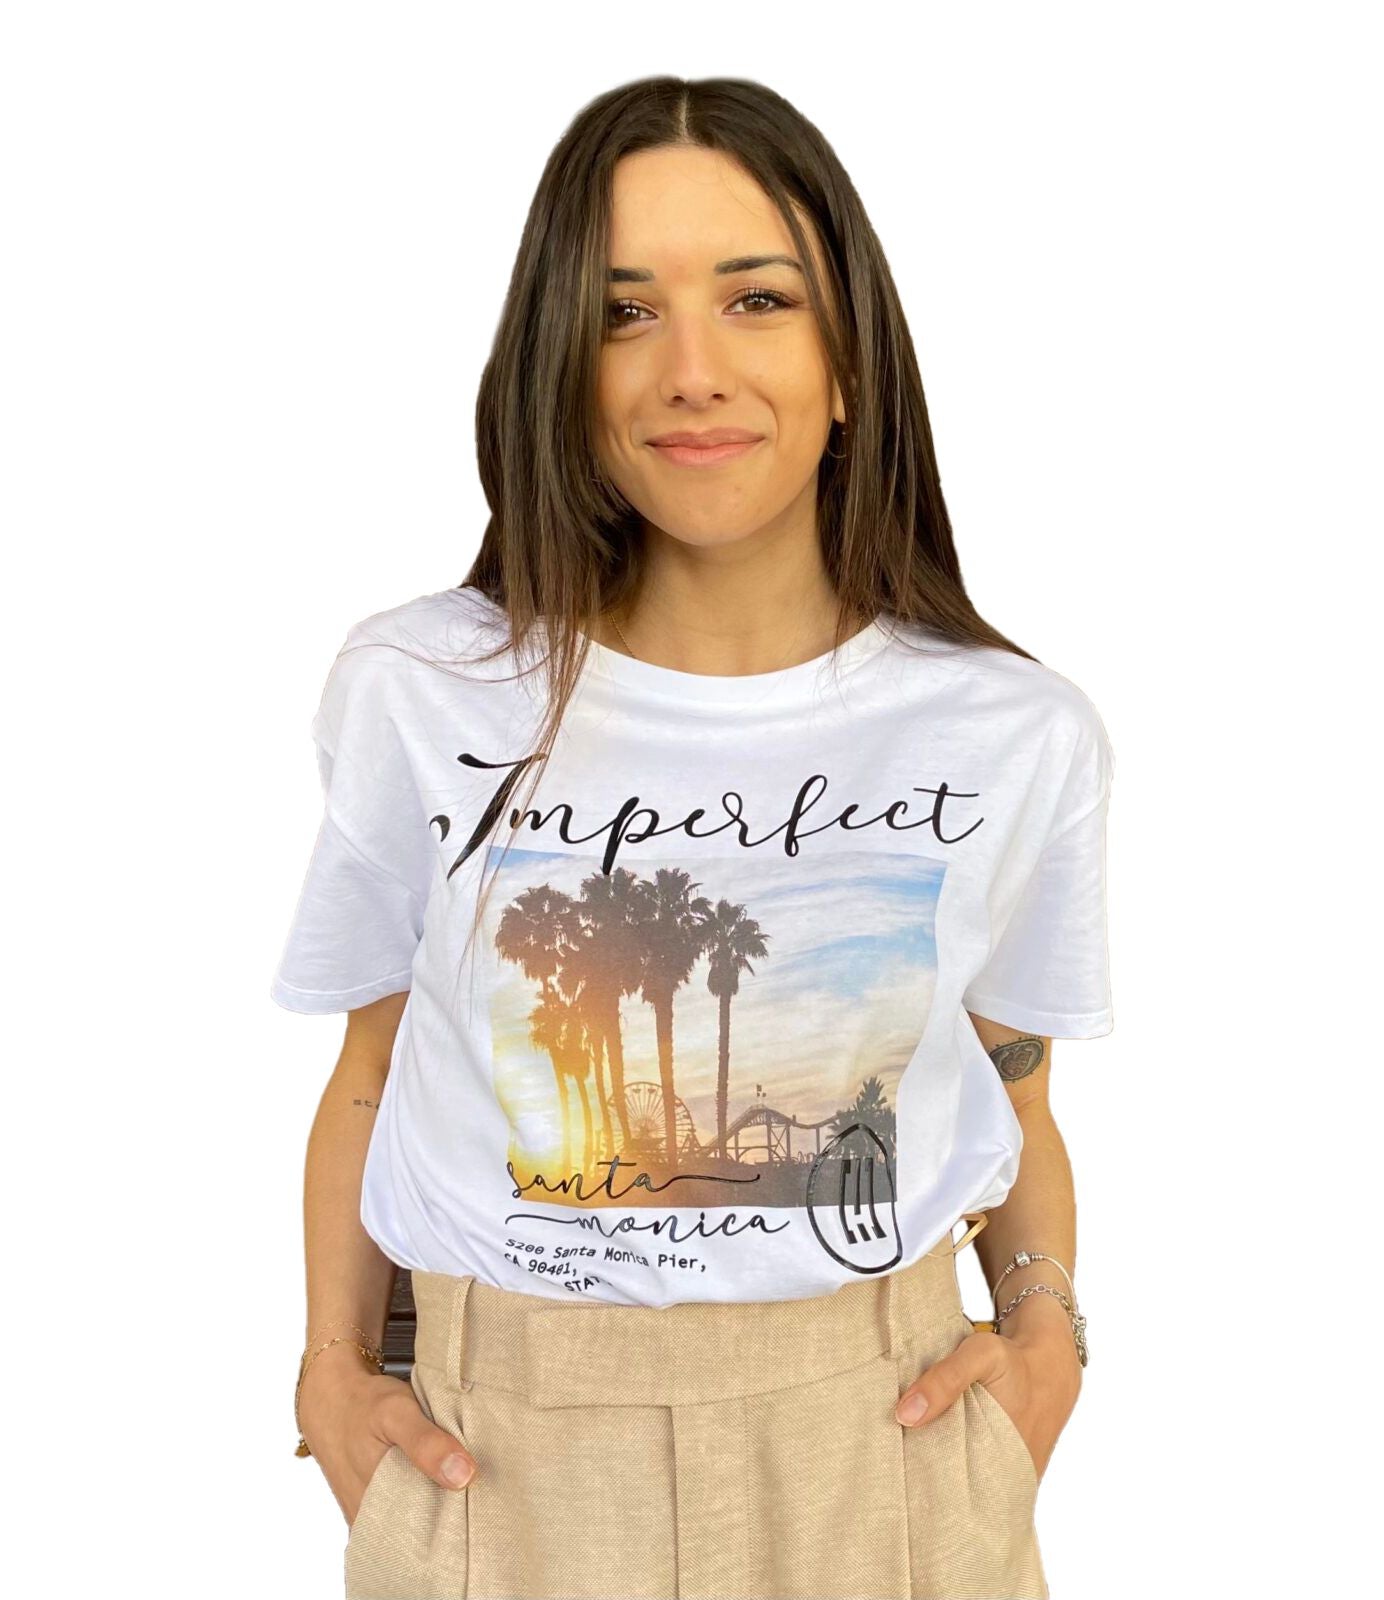 Imperfect Elegant White Cotton Tee with Embossed Lettering